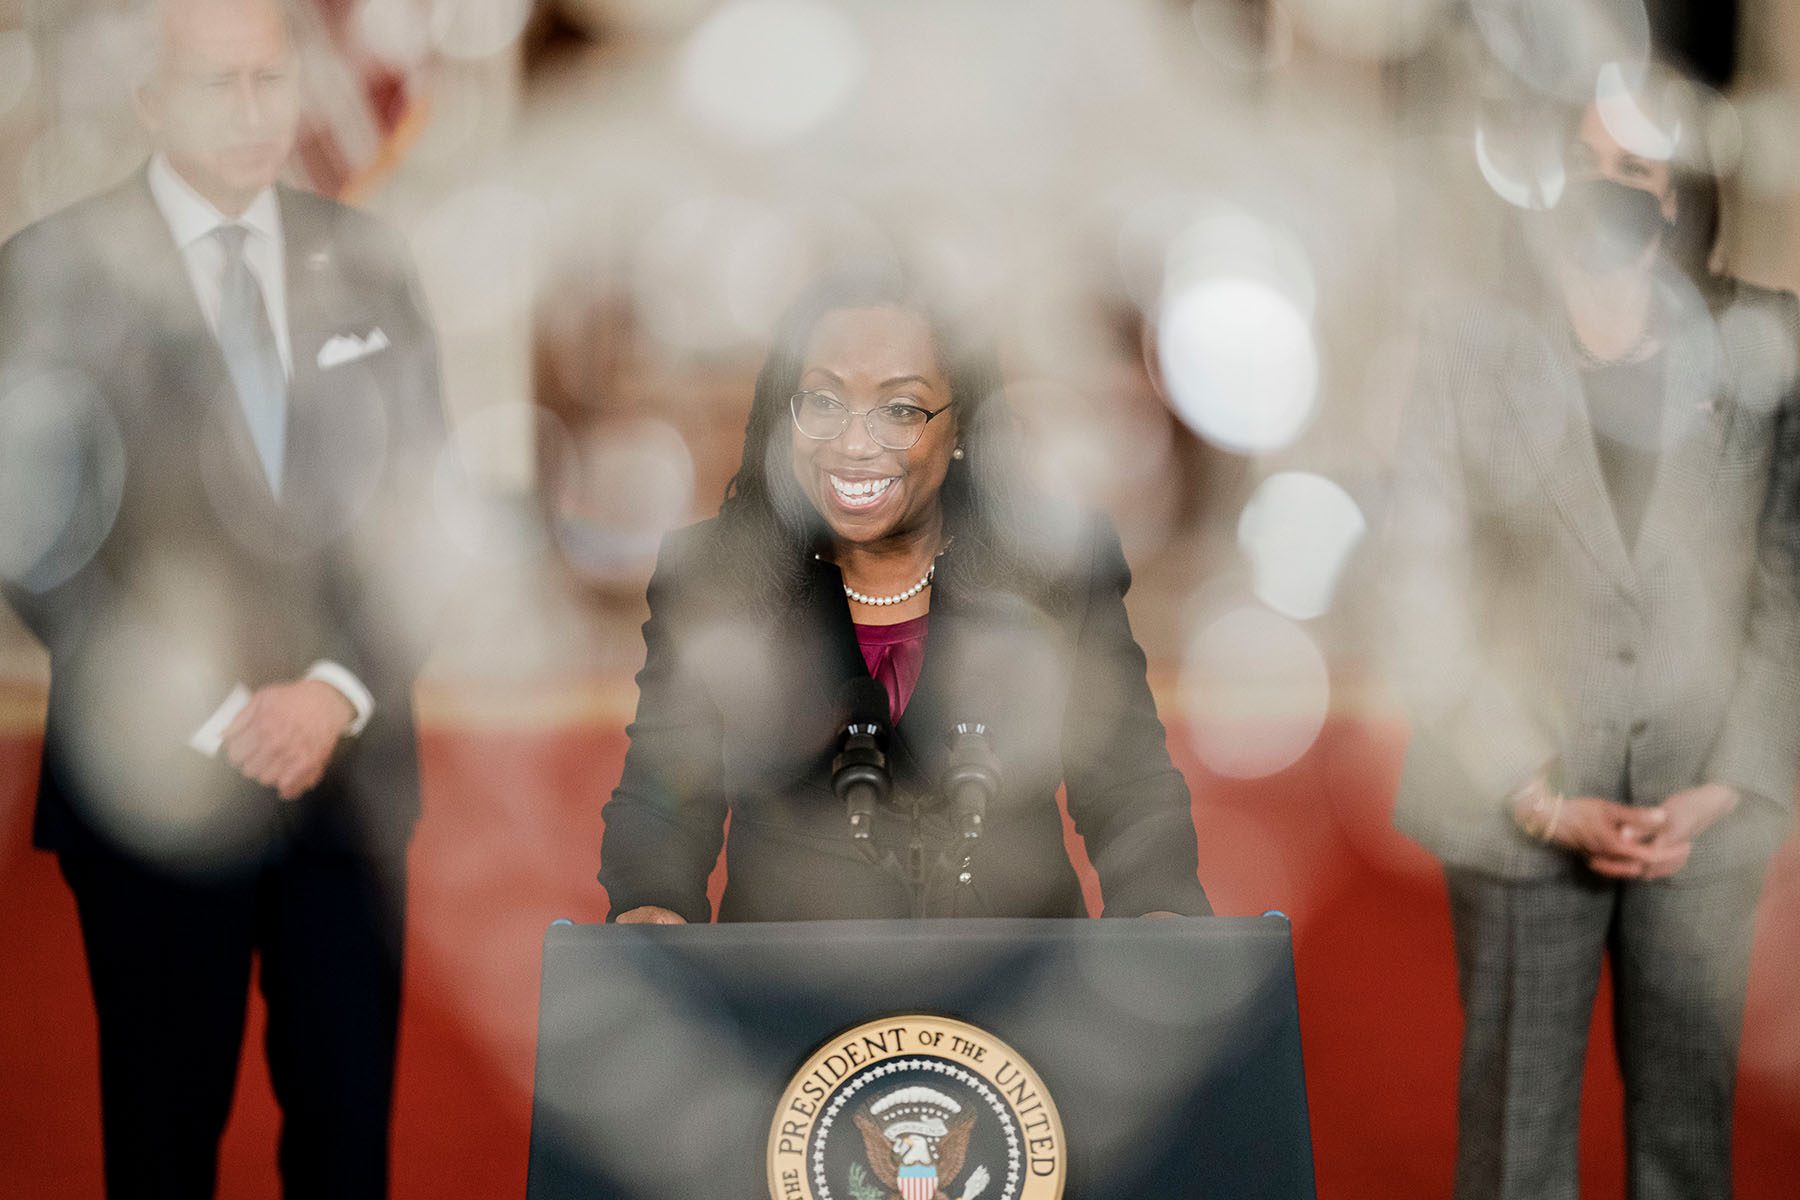 Flanked by President Biden and Vice President Harris, Judge Ketanji Brown Jackson delivers remarks on her nomination at the White House.